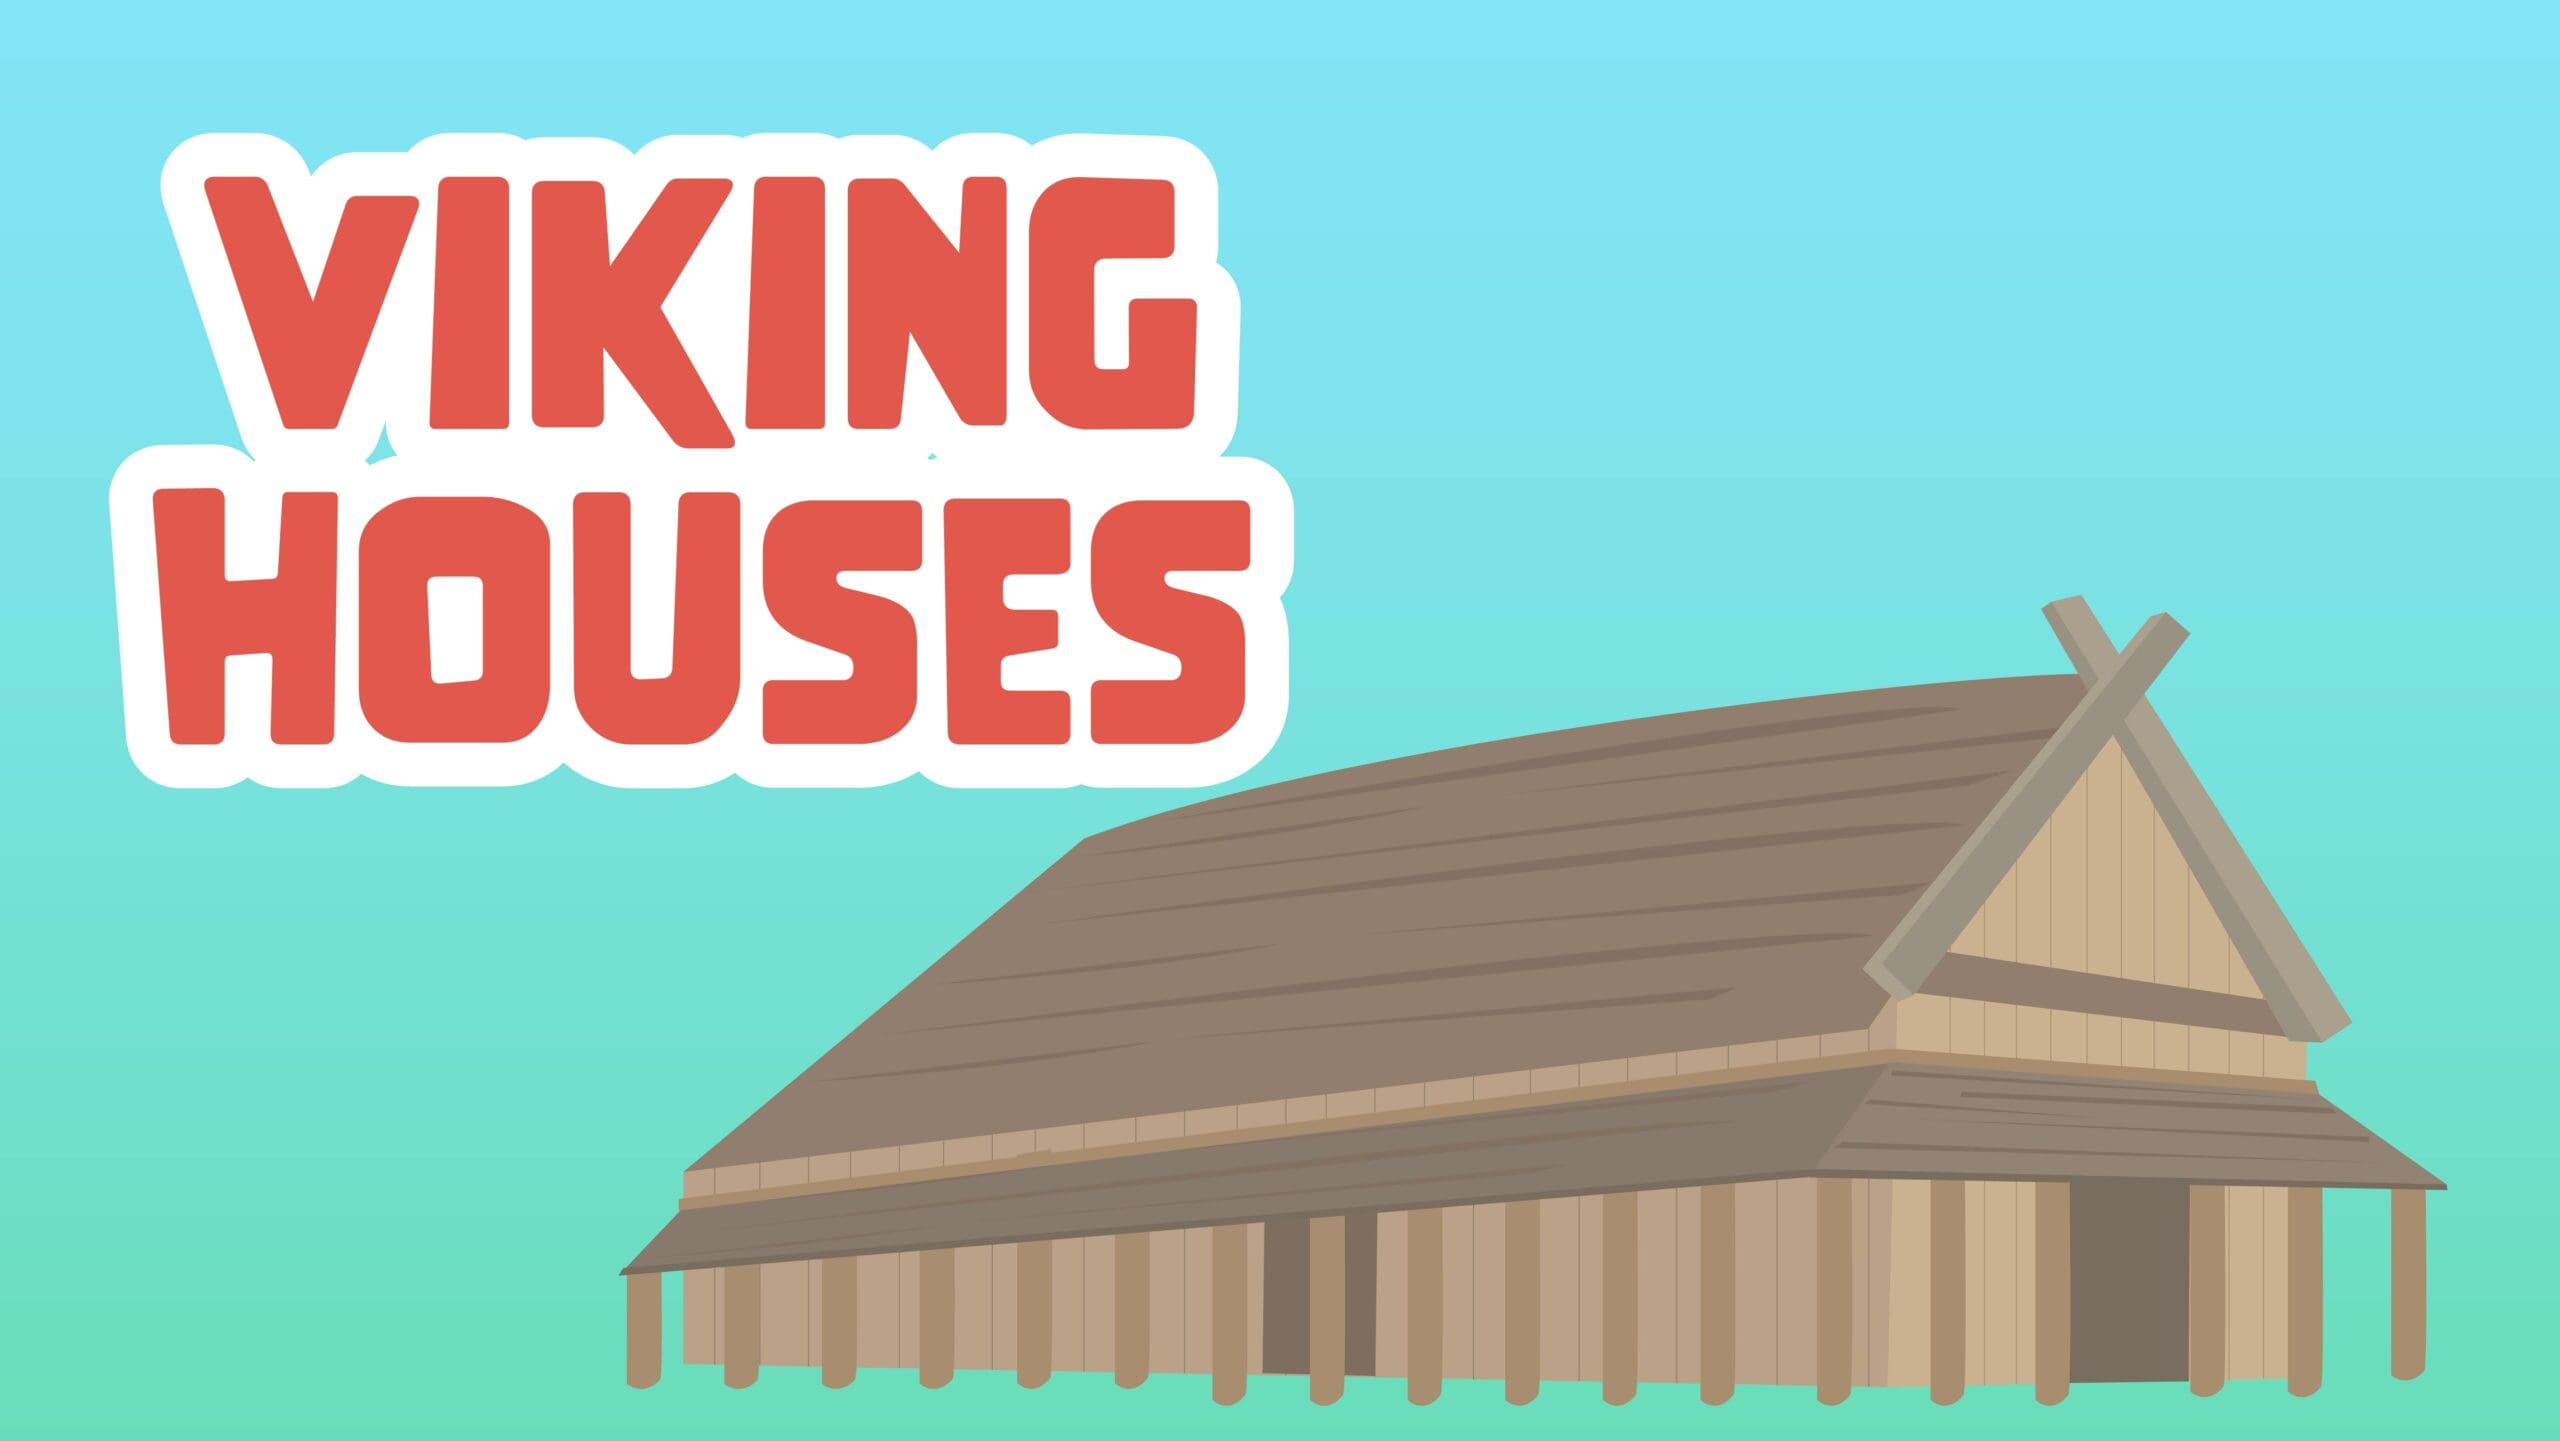 Viking Houses Facts for Kids – 5 Valuable Facts about Viking Houses